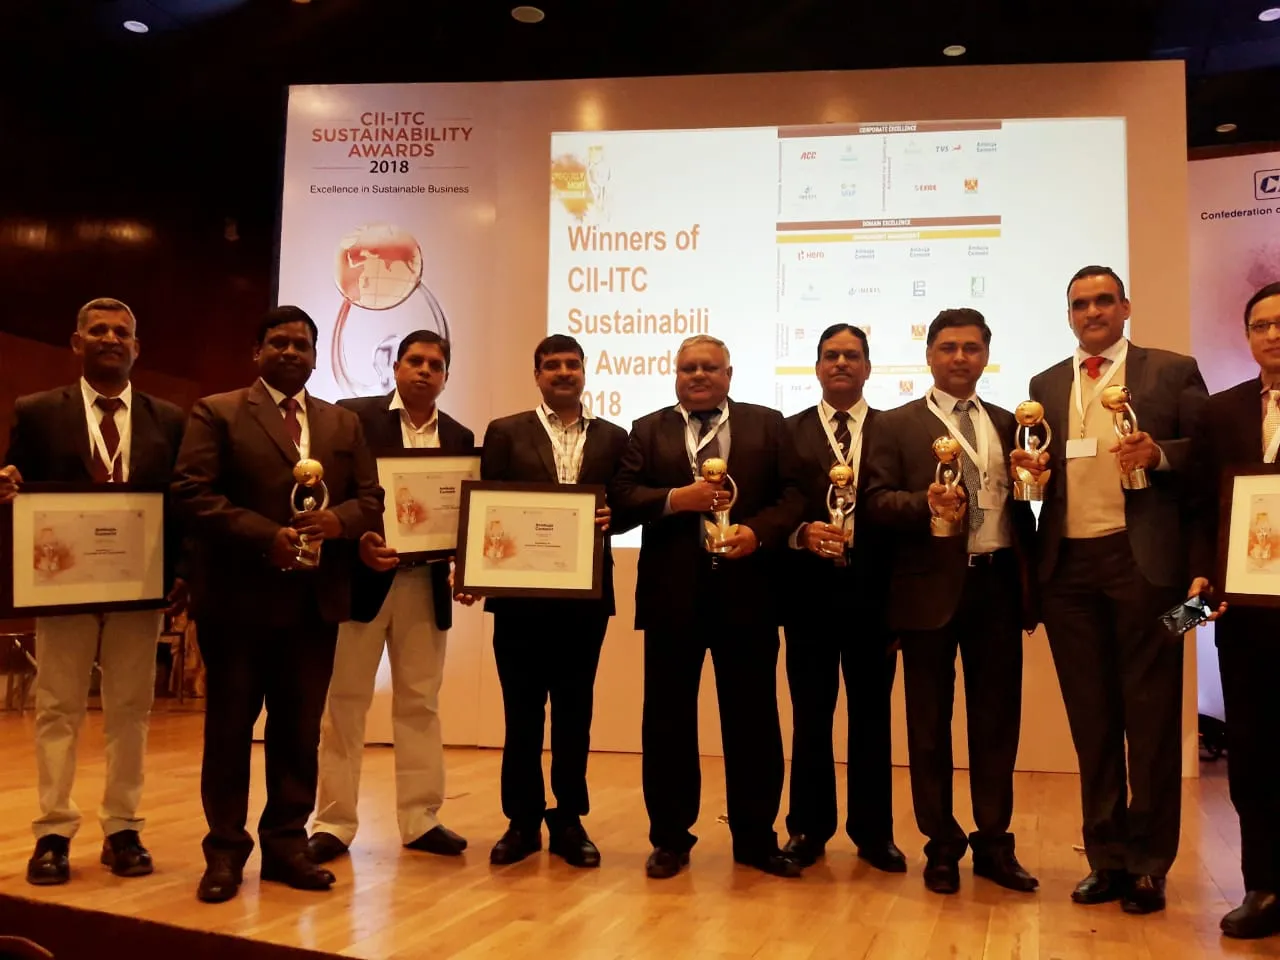 ACC Receives Highest Recognition at CII-ITC Sustainability Awards 2019